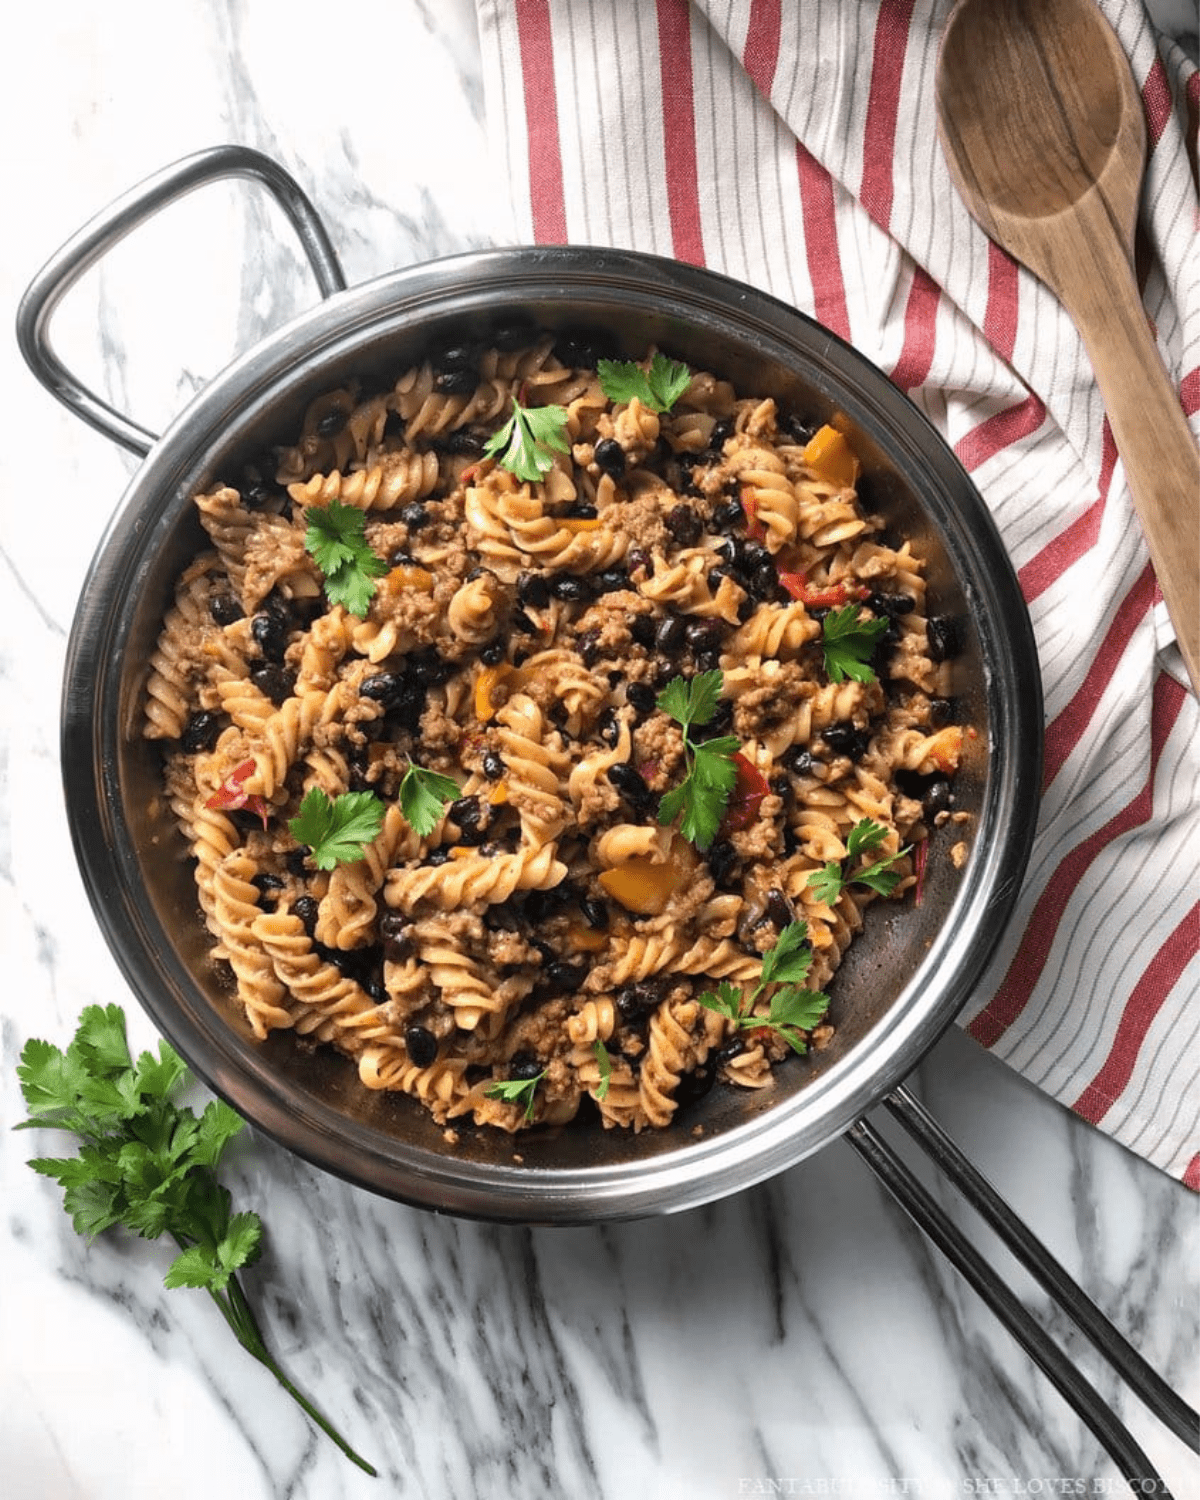 Pasta with black beans and ground beef in a skillet